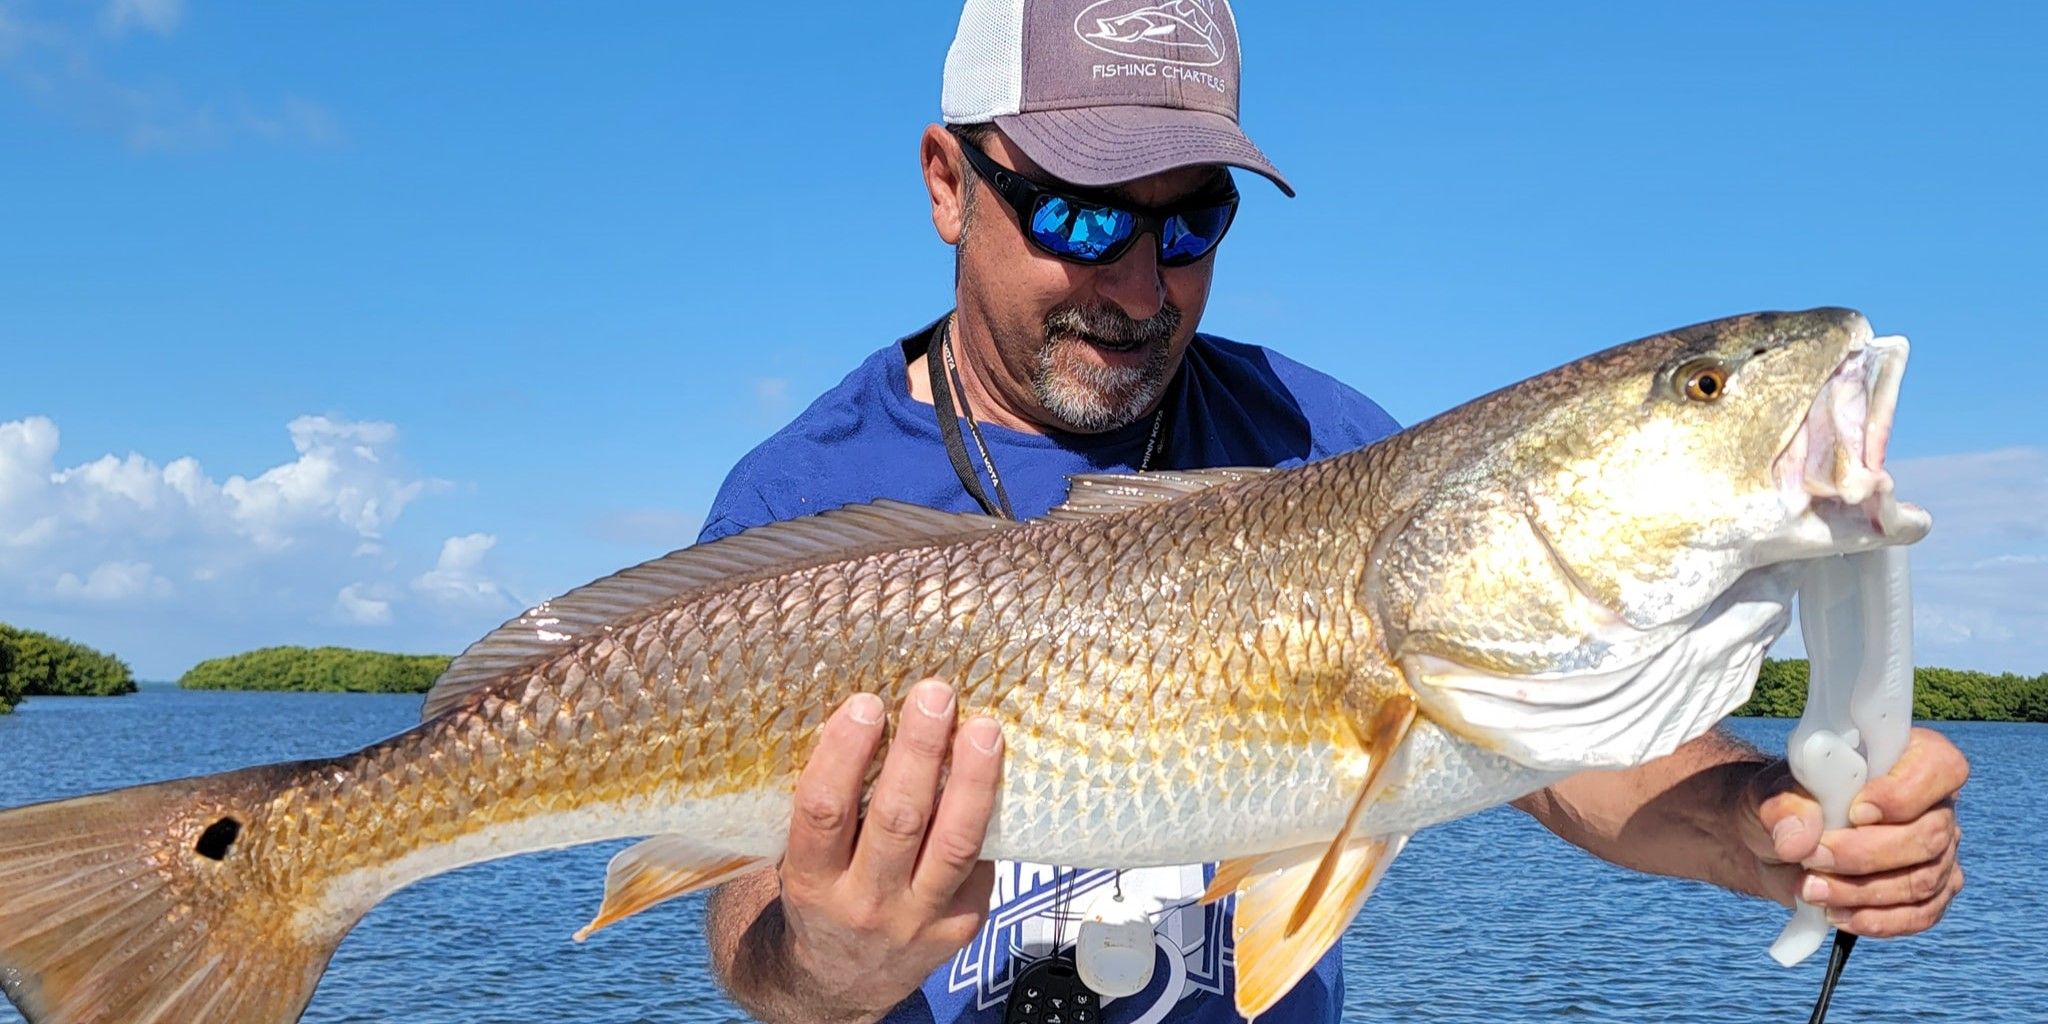 Wicked Salty Fishing Charters Fishing Charters in St. Petersburg fishing Inshore